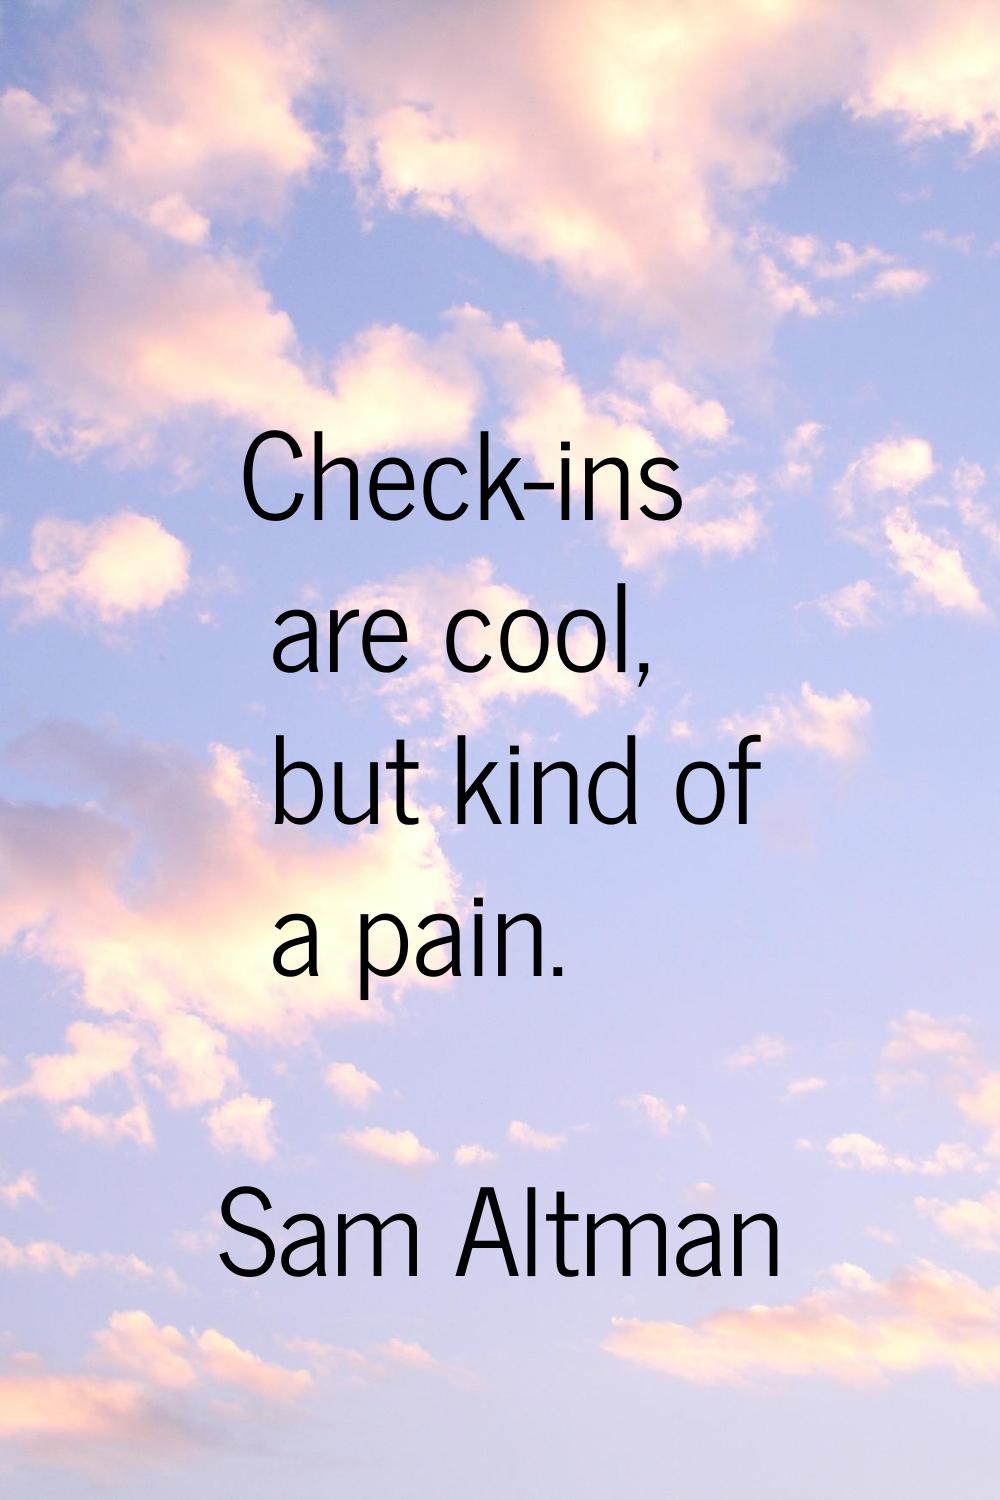 Check-ins are cool, but kind of a pain.